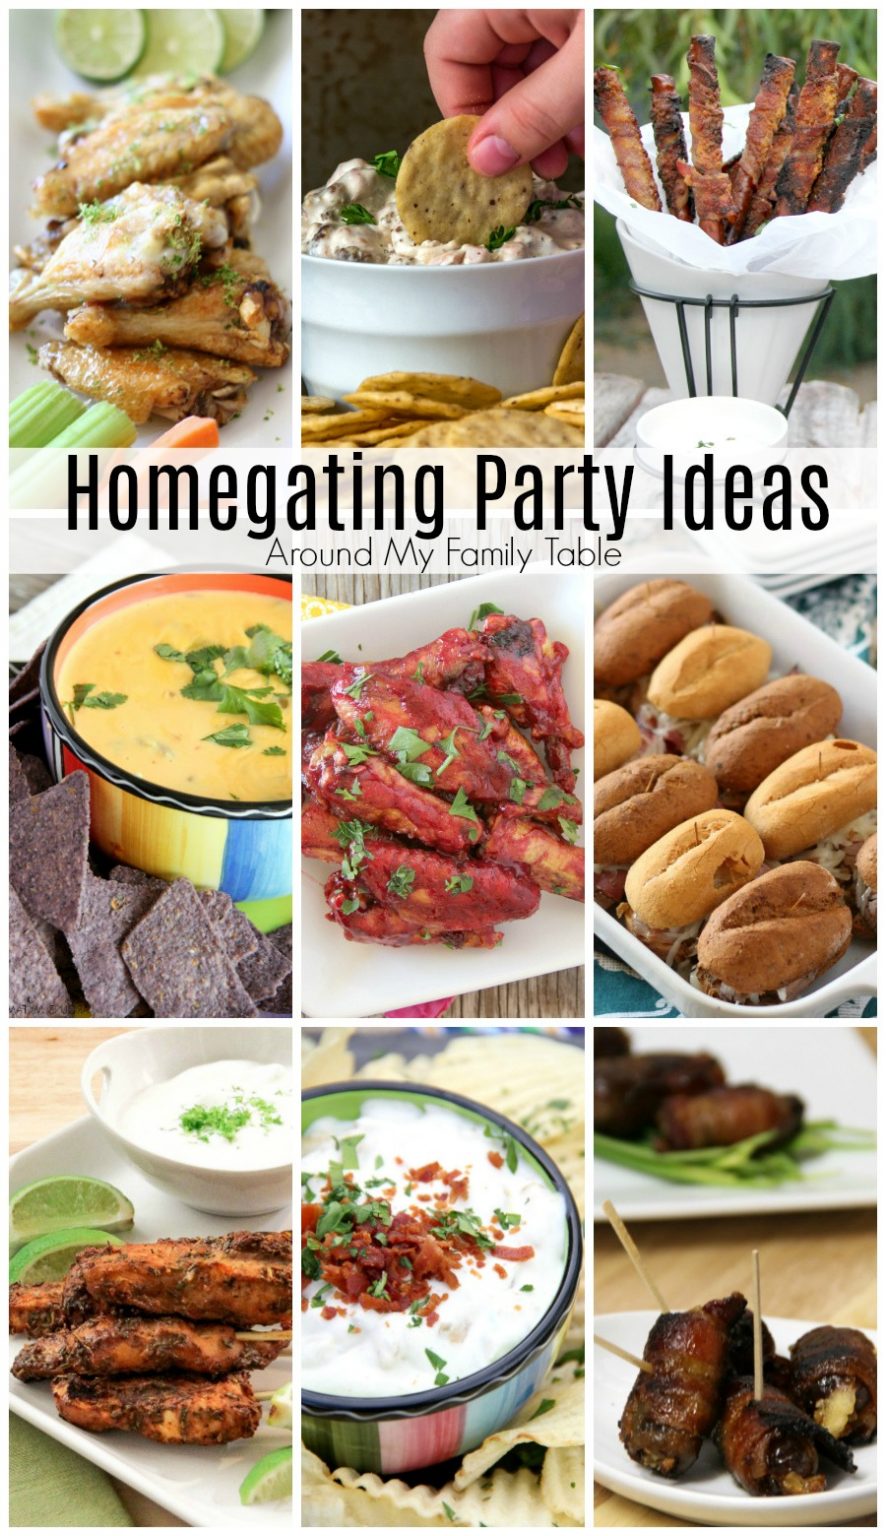 Homegating Party Ideas - Around My Family Table